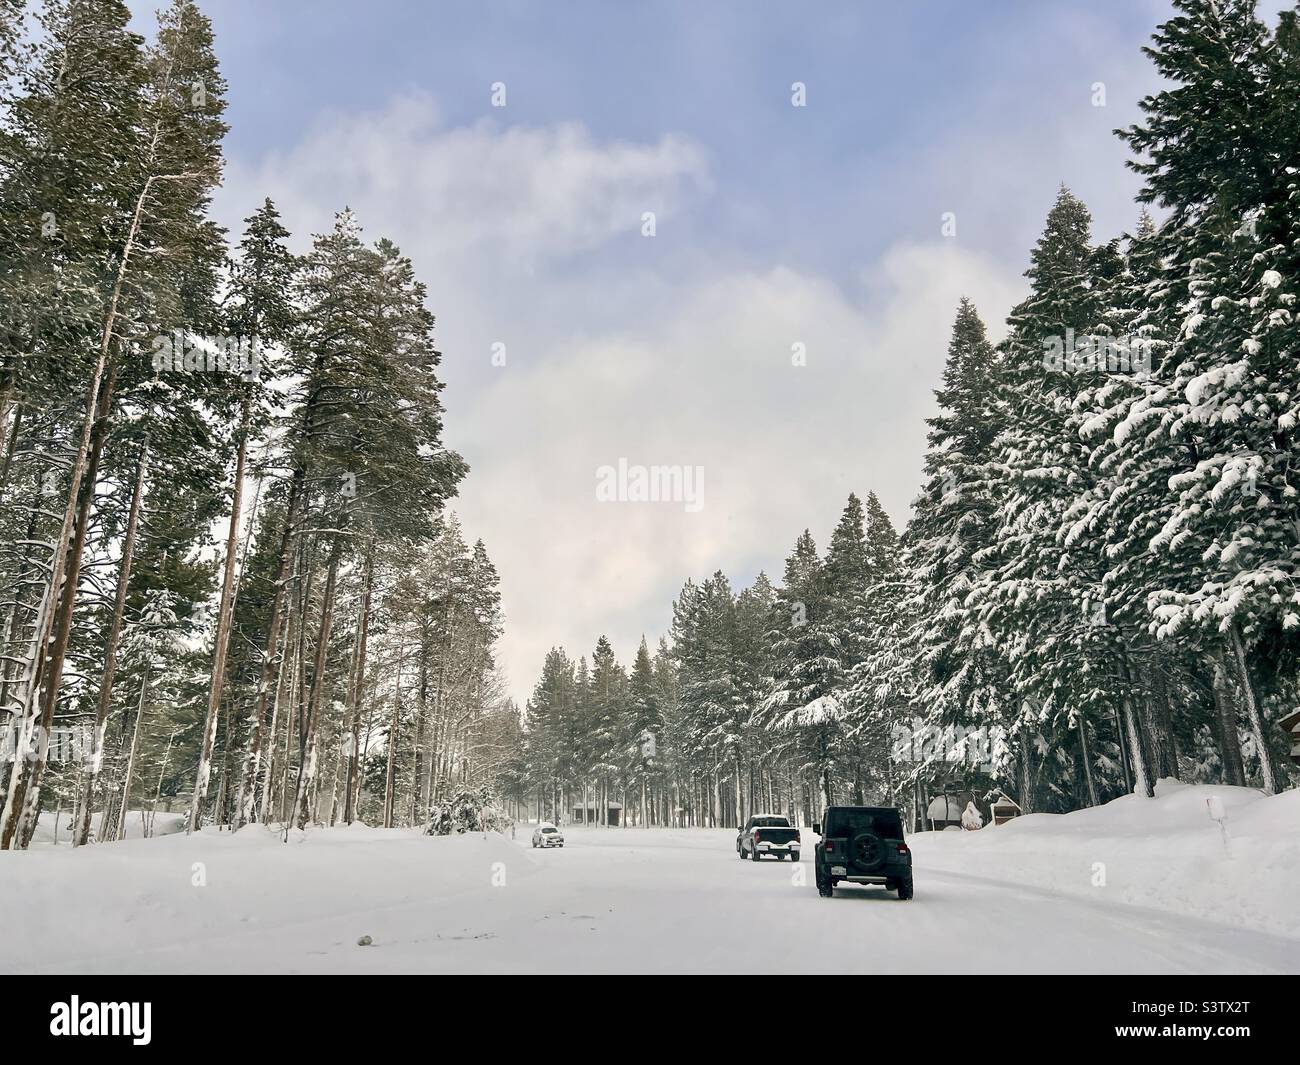 Cars driving on snow-covered road with tall pine trees on either side, at Mammoth Mountain, California Stock Photo